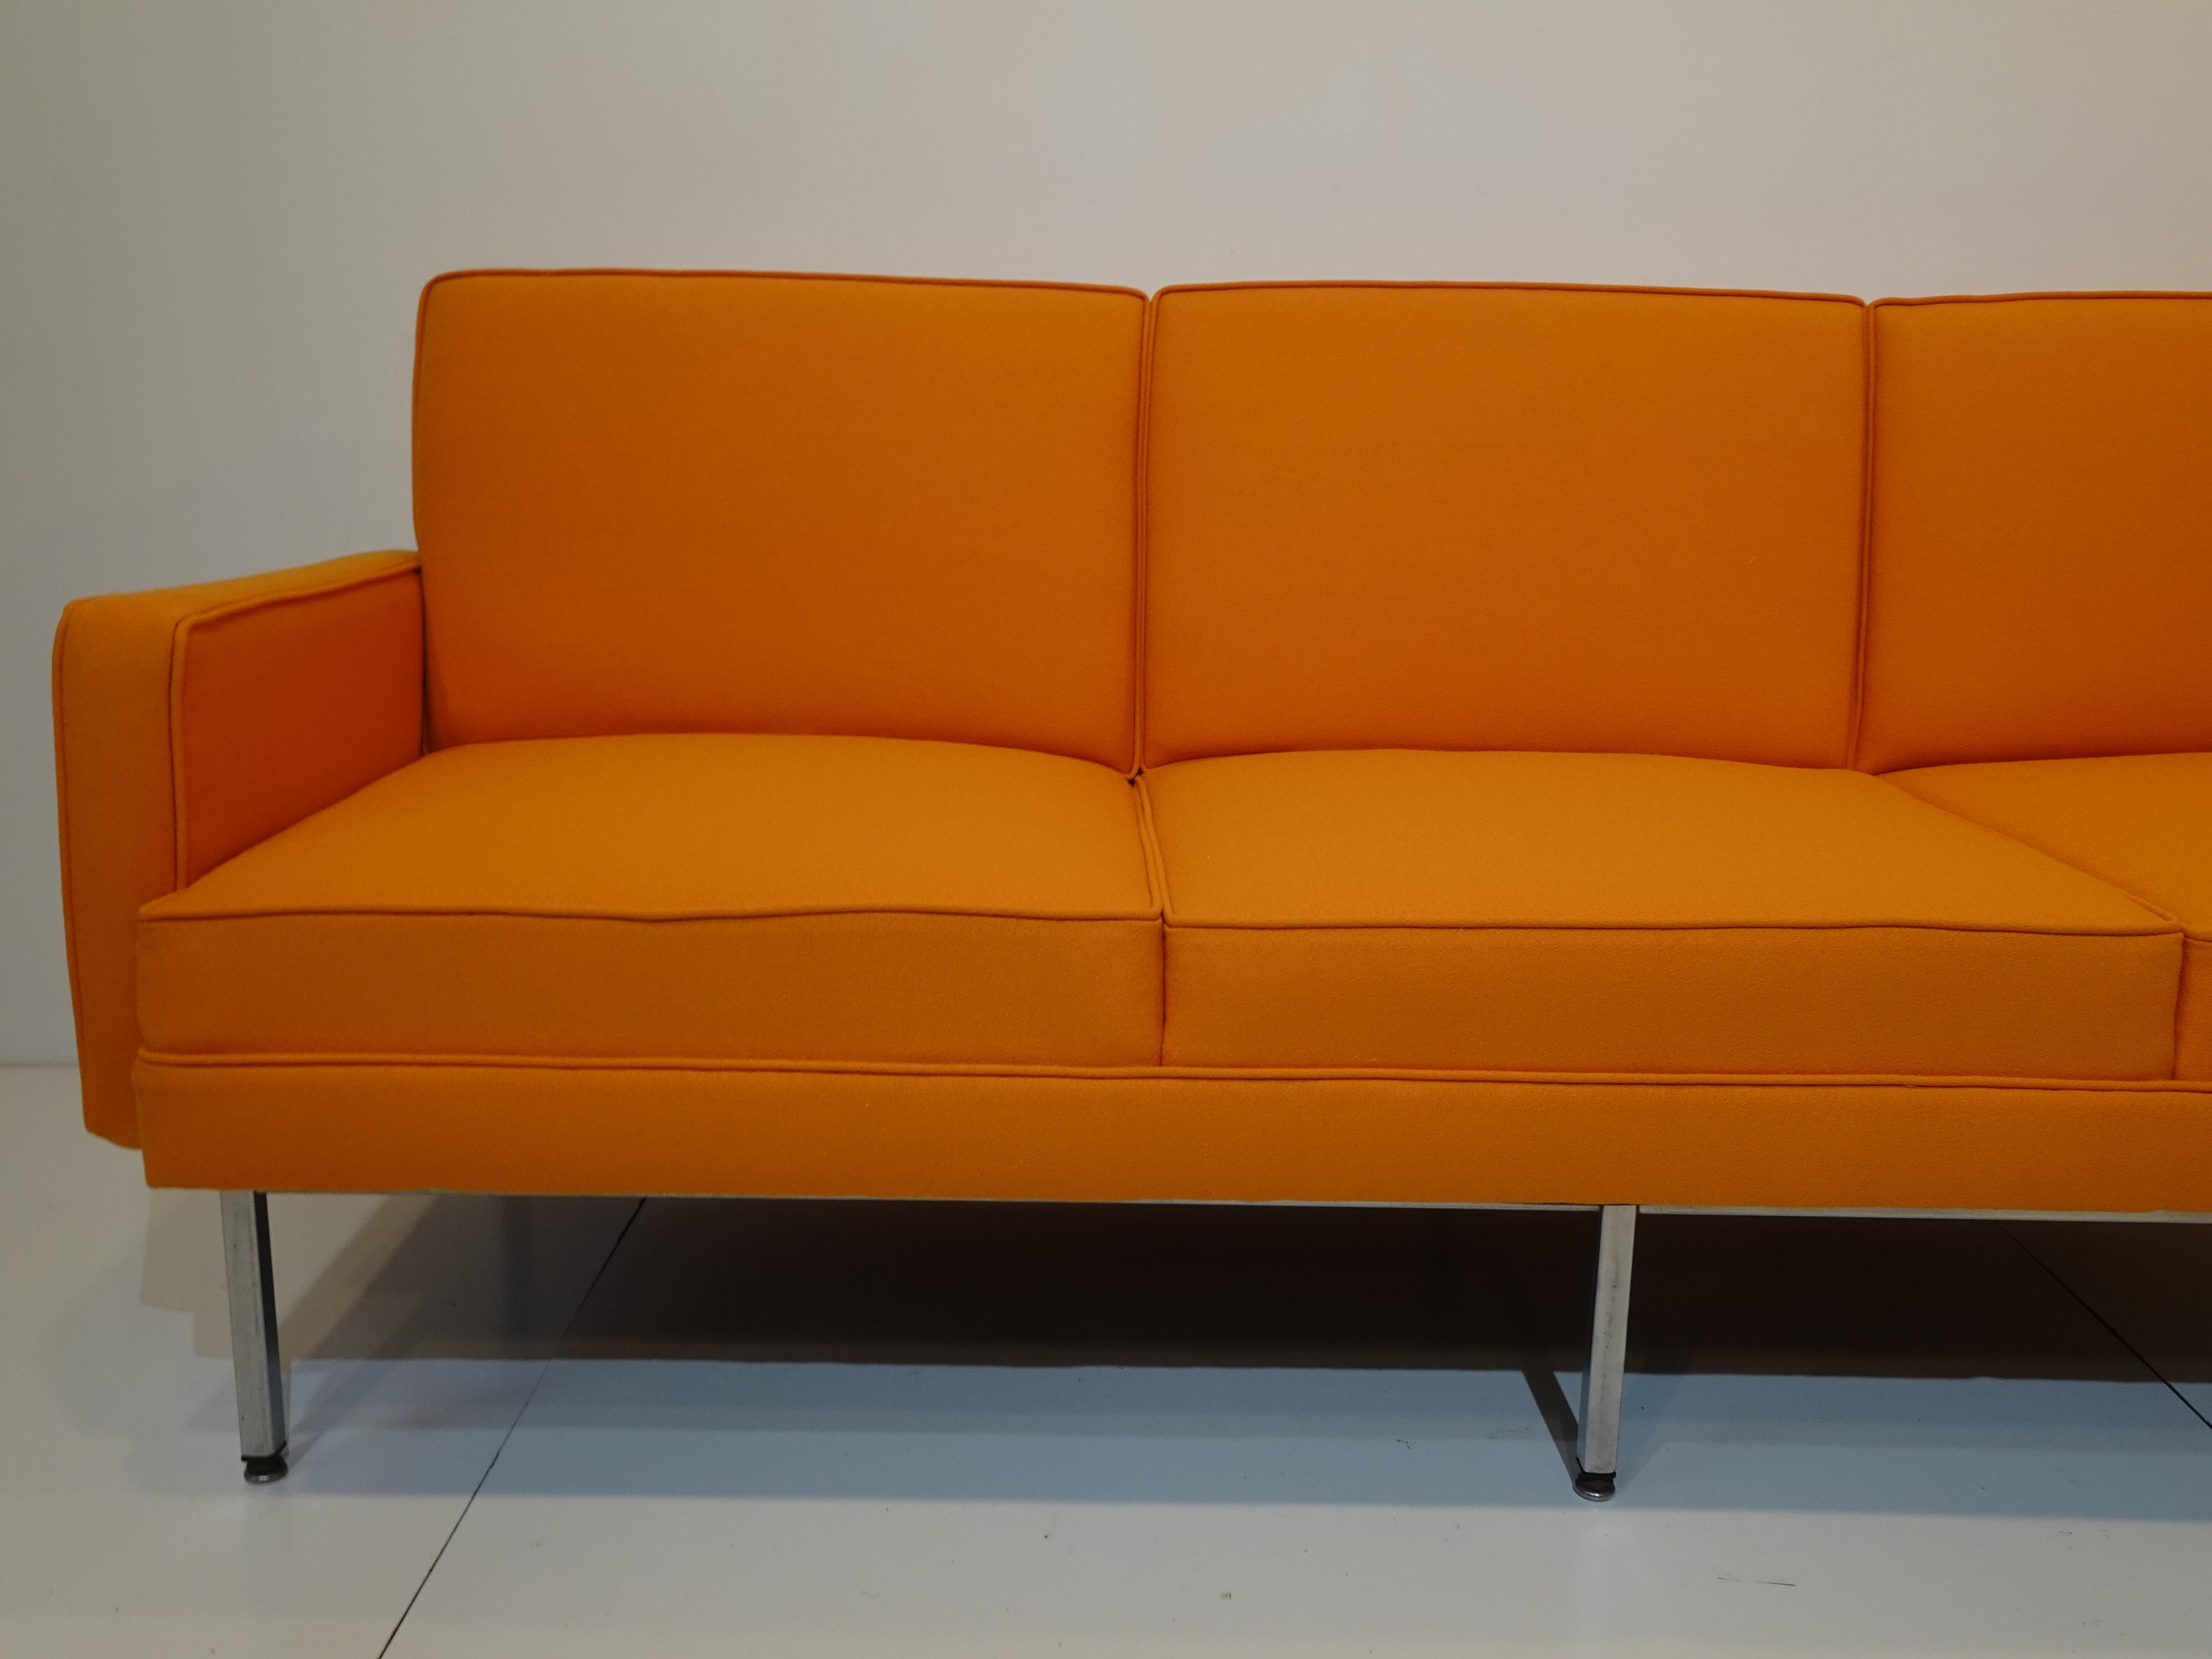 A steel framed sofa in a tight woven soft tangerine orange fabric upholstered with built in back and bottom cushions. Having arms to each side for comfort, sitting on aluminum steel legs with foot pads to protect your floors designed and